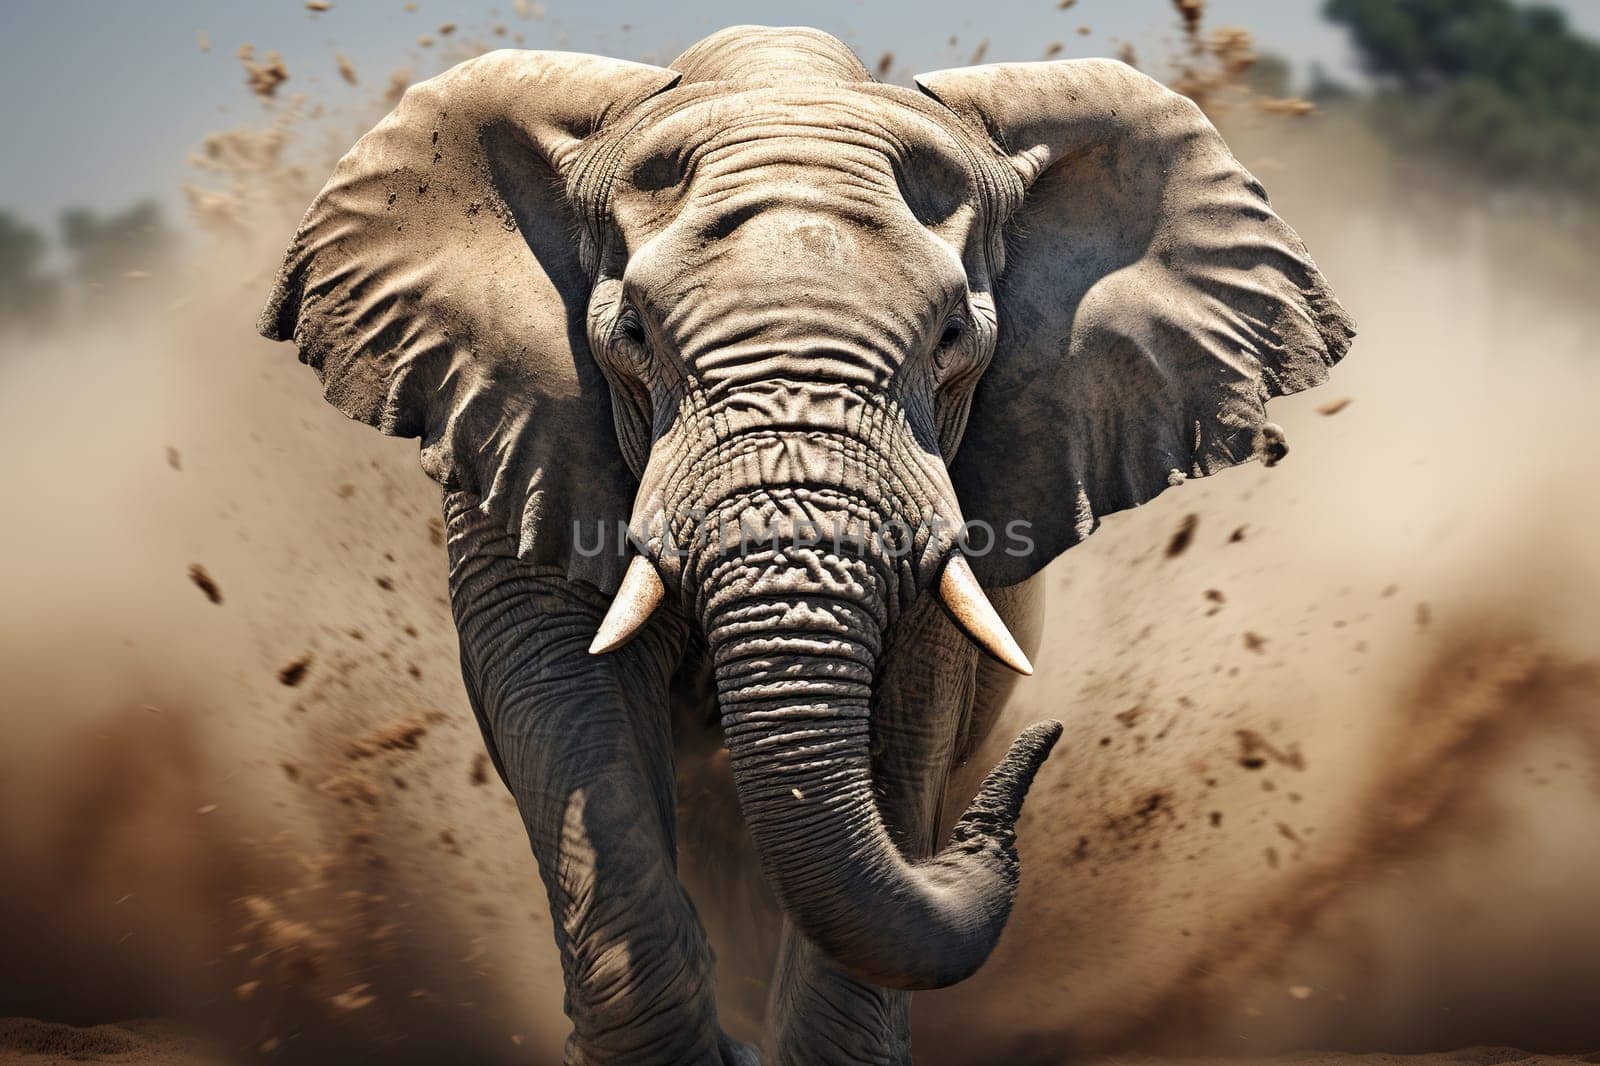 A huge elephant walks in clouds of gray dust. Generated by artificial intelligence by Vovmar